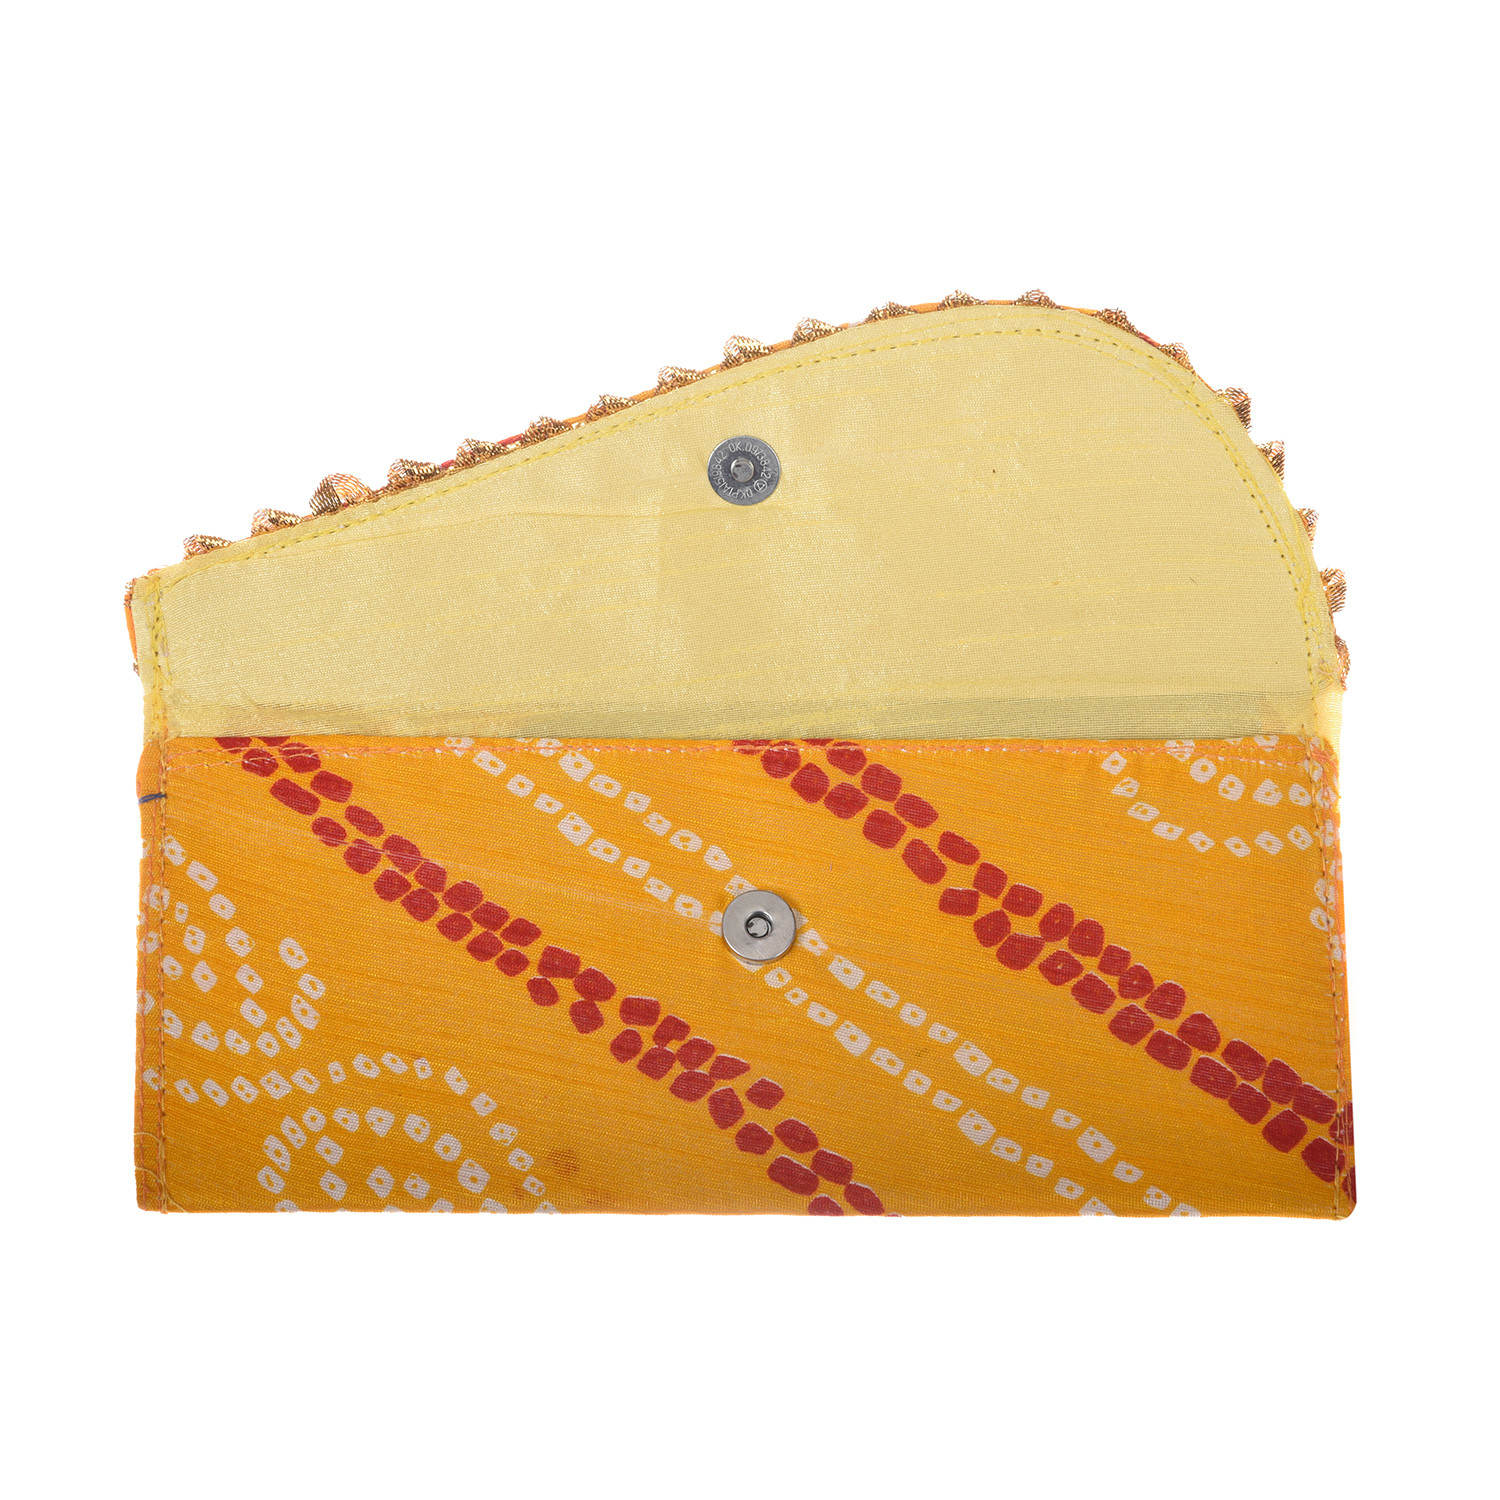 Kuber Industries Shagun Envelope for Gift|Bandhej Pattern for Gifting Lifafa|Cardboard Envelope for Marriage|Many Occassions (Assorted)